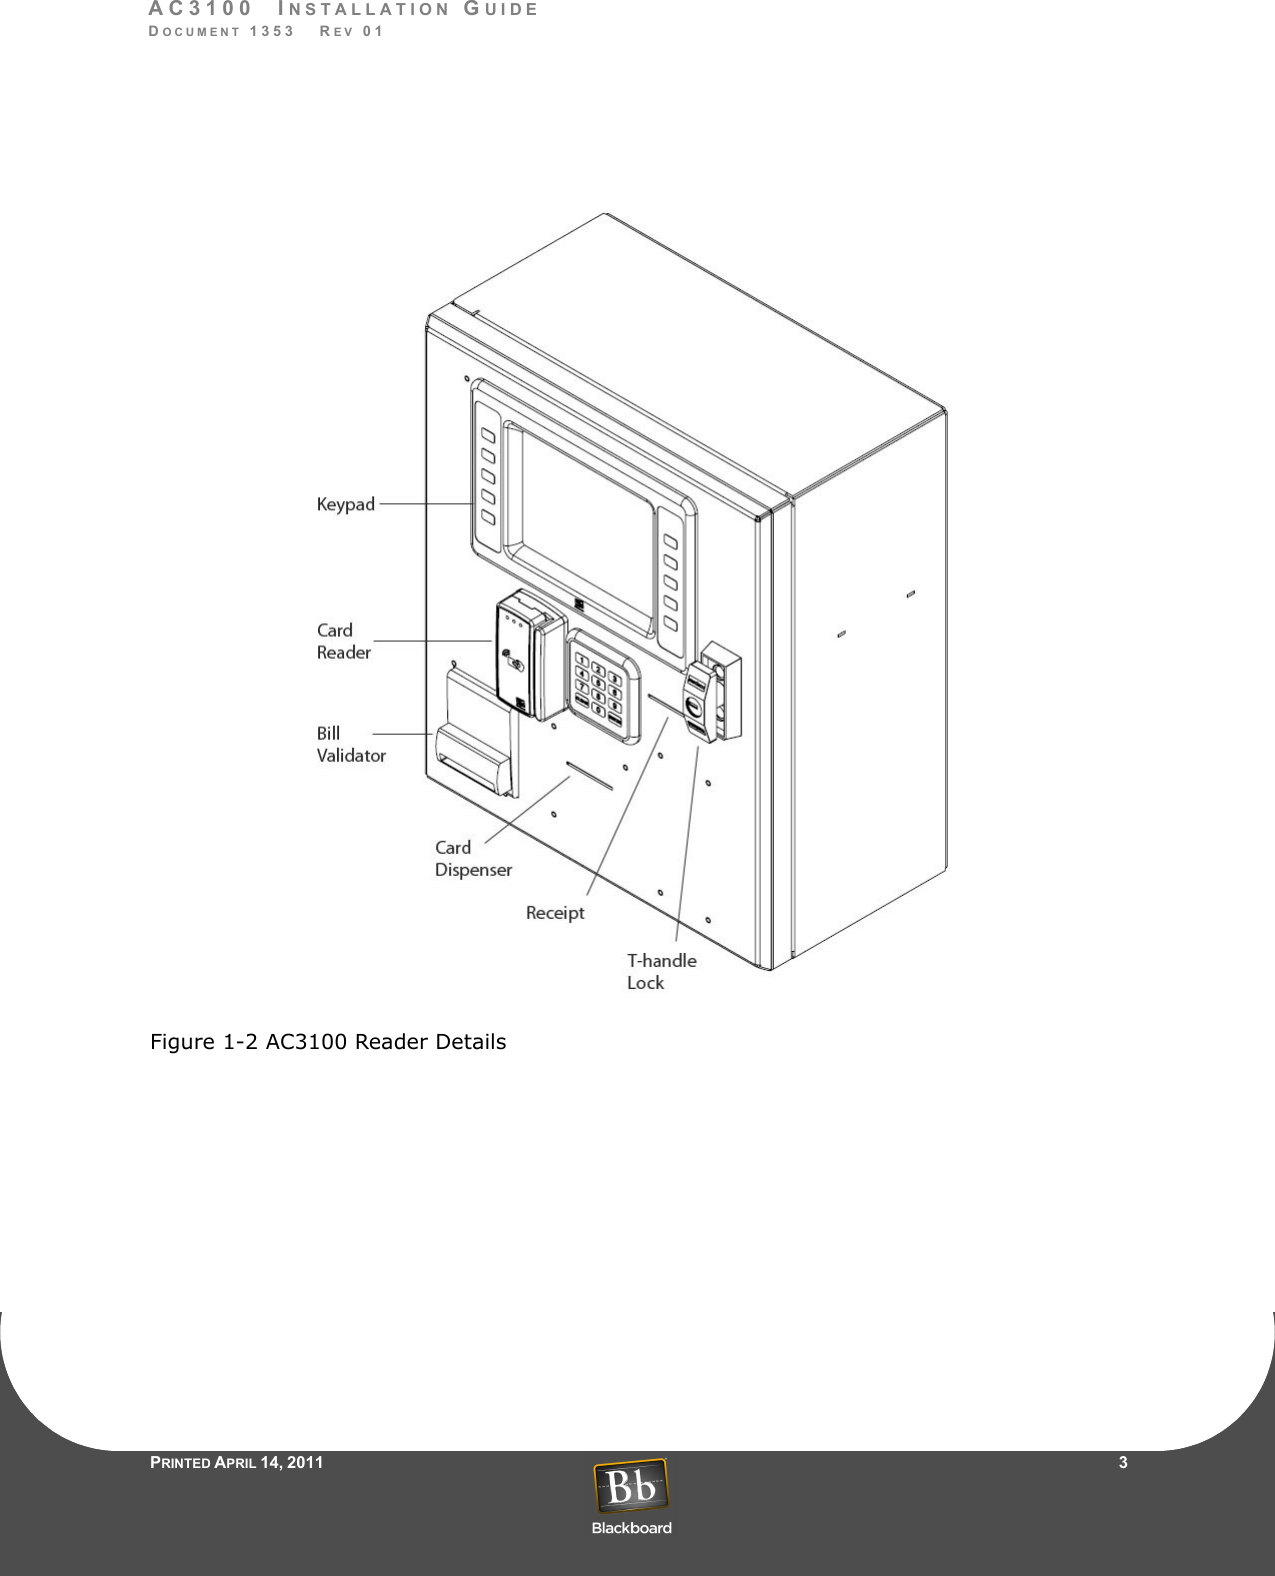 AC3100  INSTALLATION GUIDEDOCUMENT 1353   REV 01PRINTED APRIL 14, 2011                     3Figure 1-2 AC3100 Reader Details